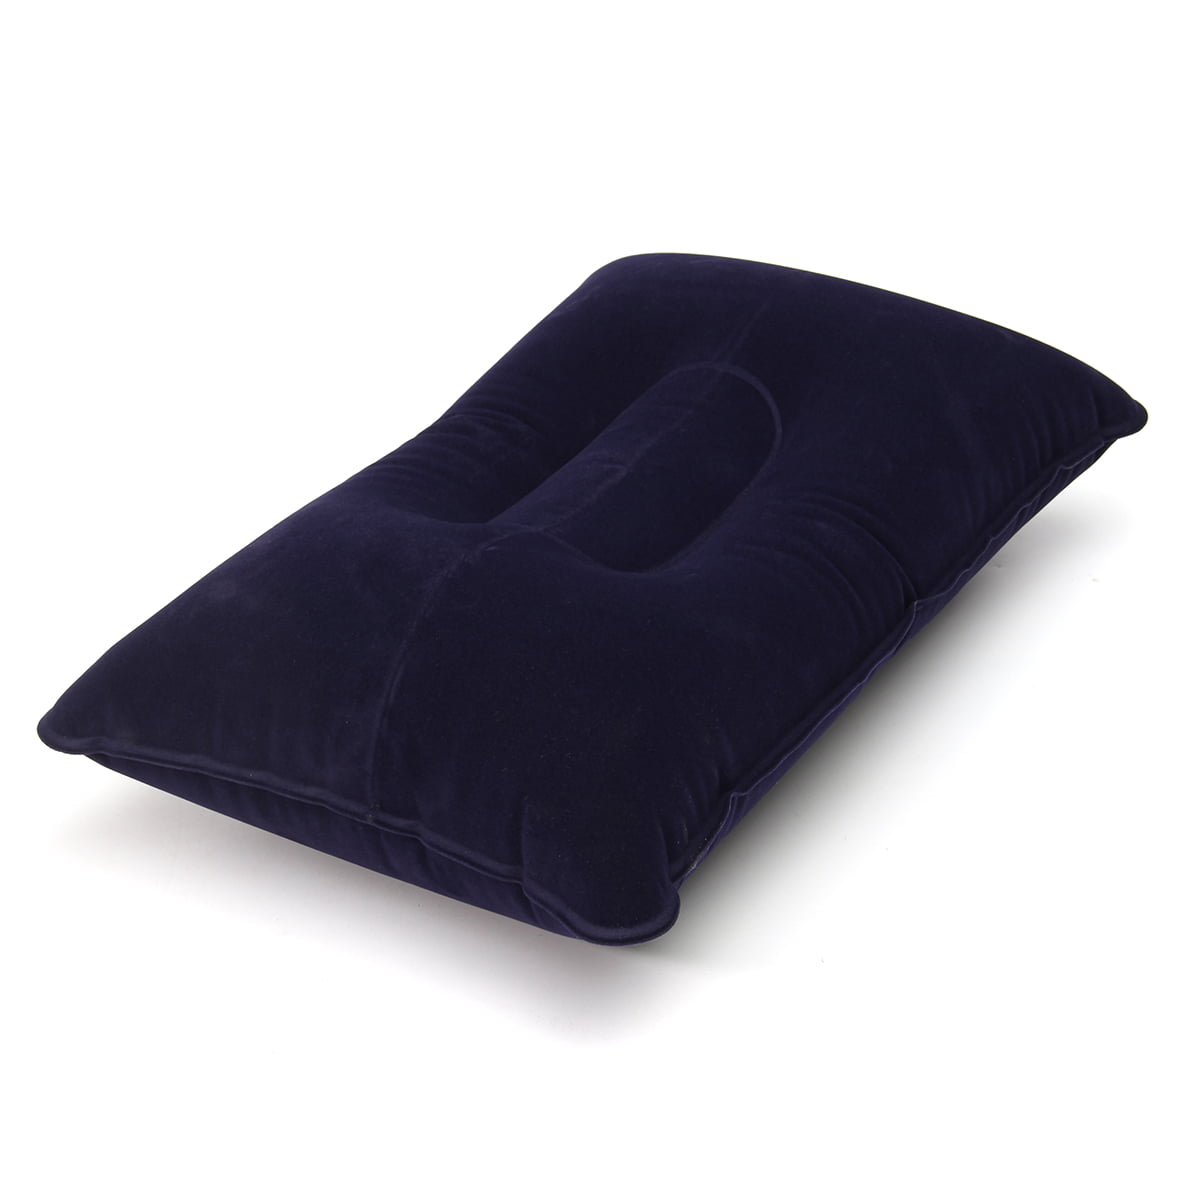 Wenjie Inflatable Pillow Comfortable Outdoor Travel Camping Home Office Sleeping Self-Inflating Portable Pillow PVC Flocking Fleece Dark Blue